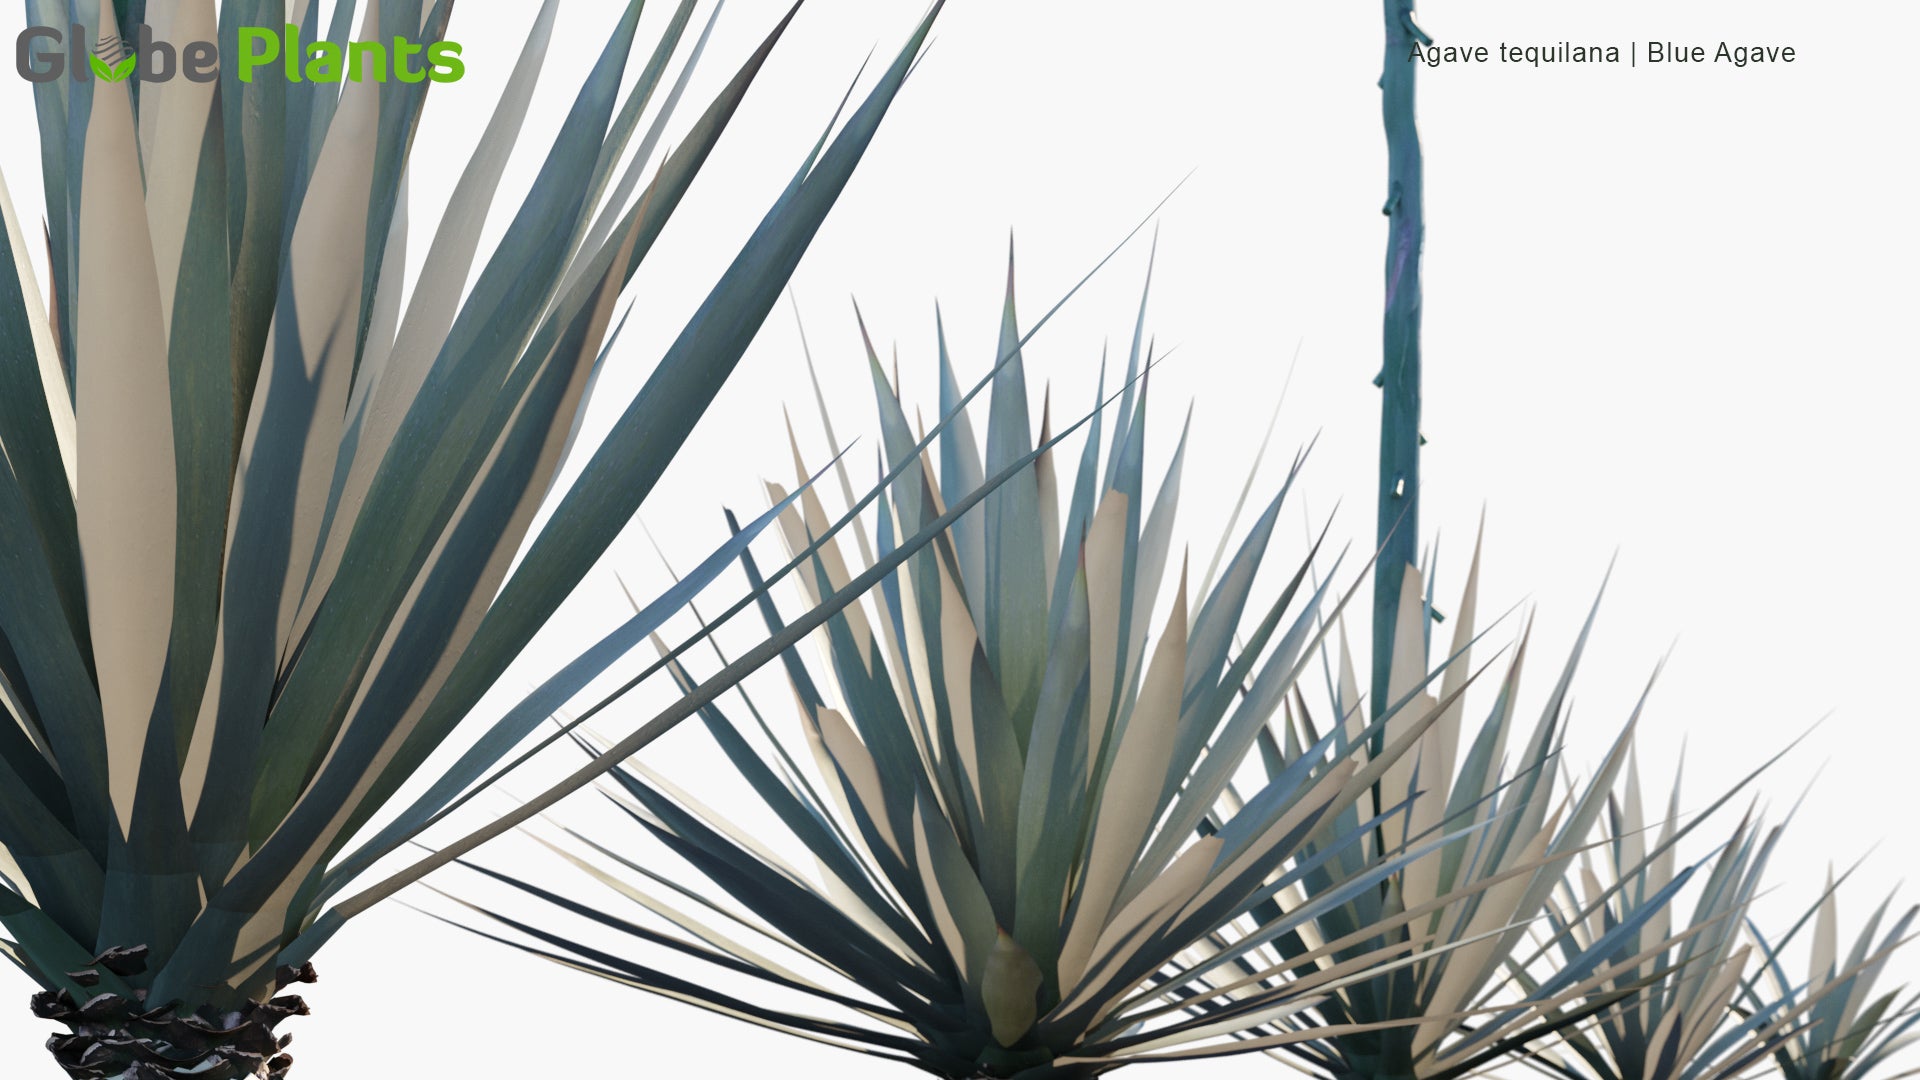 Agave Tequilana 3D Model